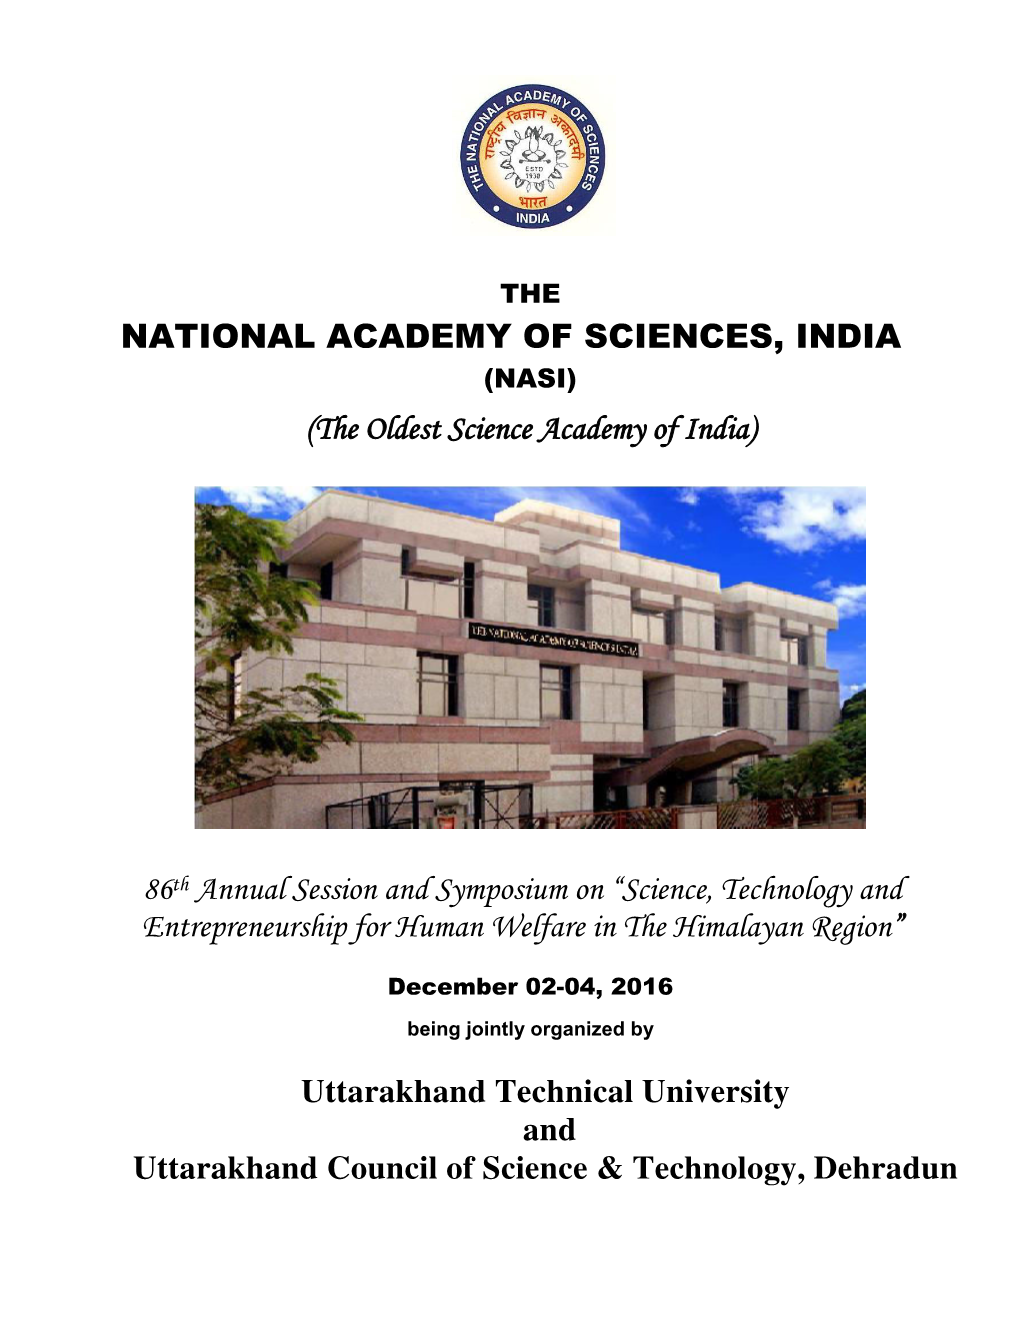 86Th Annual Session and Symposium on “Science, Technology and Entrepreneurship for Human Welfare in the Himalayan Region”